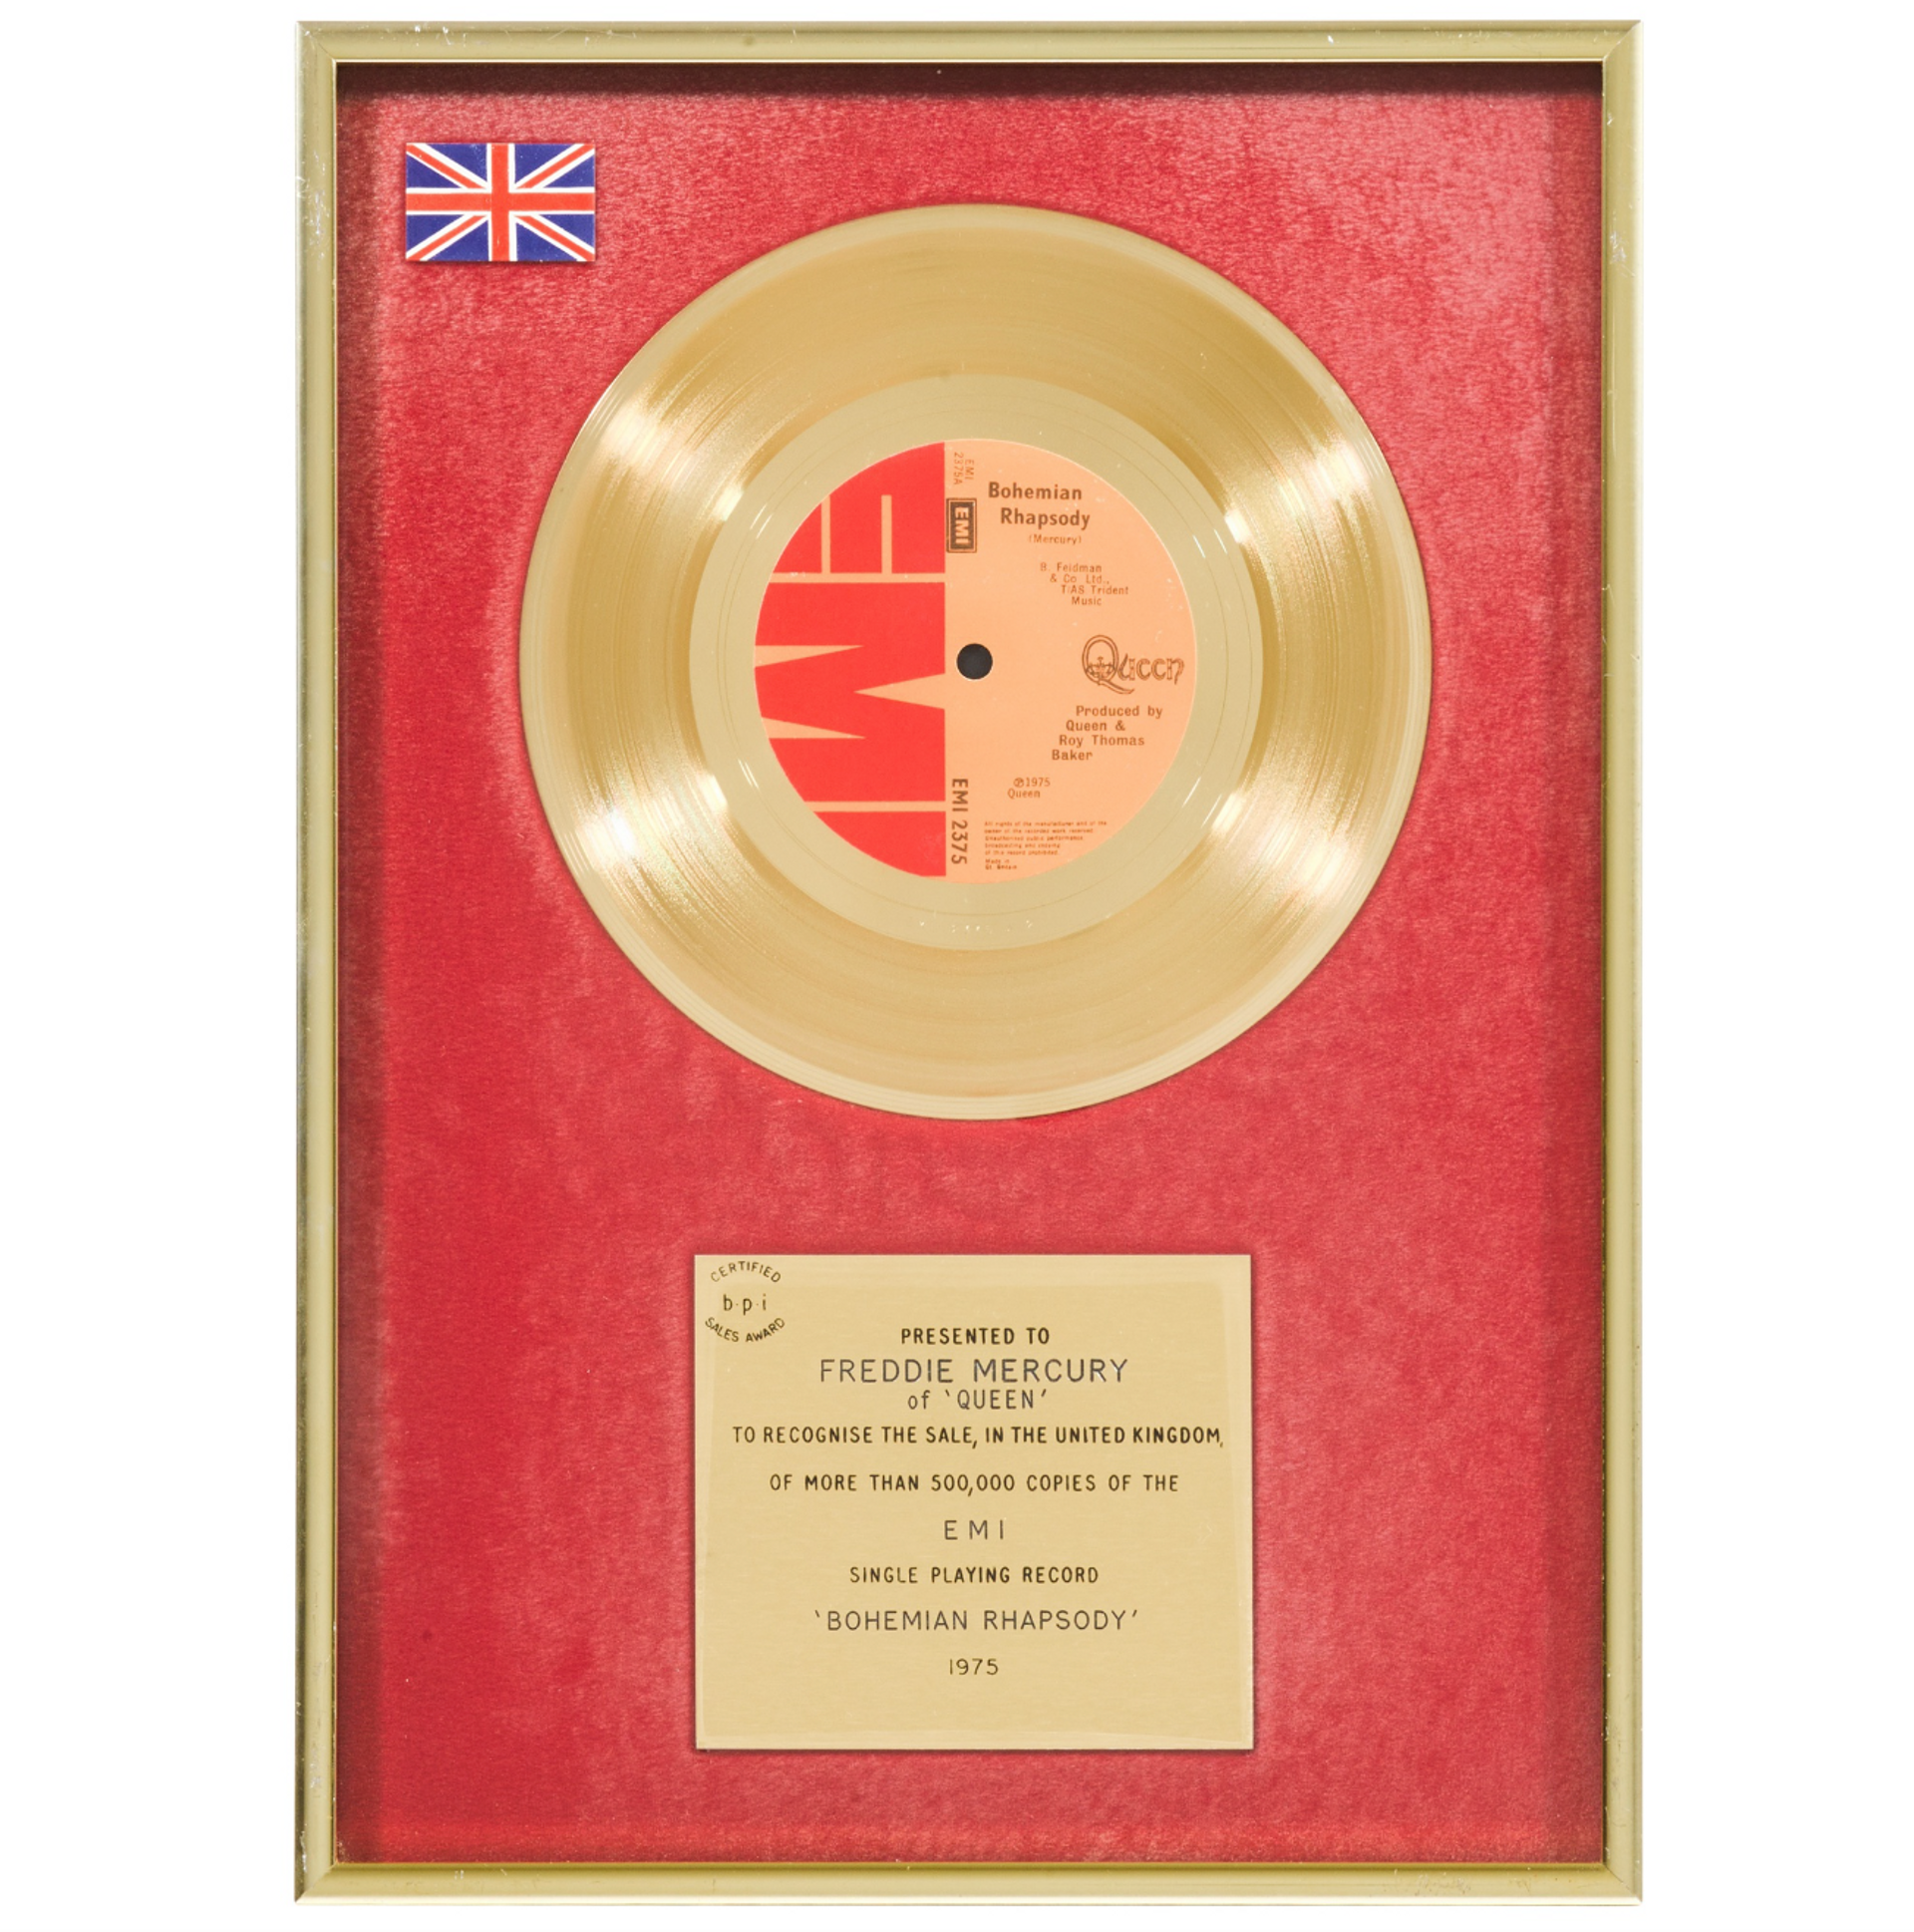 A framed award, with a golden CD and a plaque against a red background, given to Freddie Mercury.